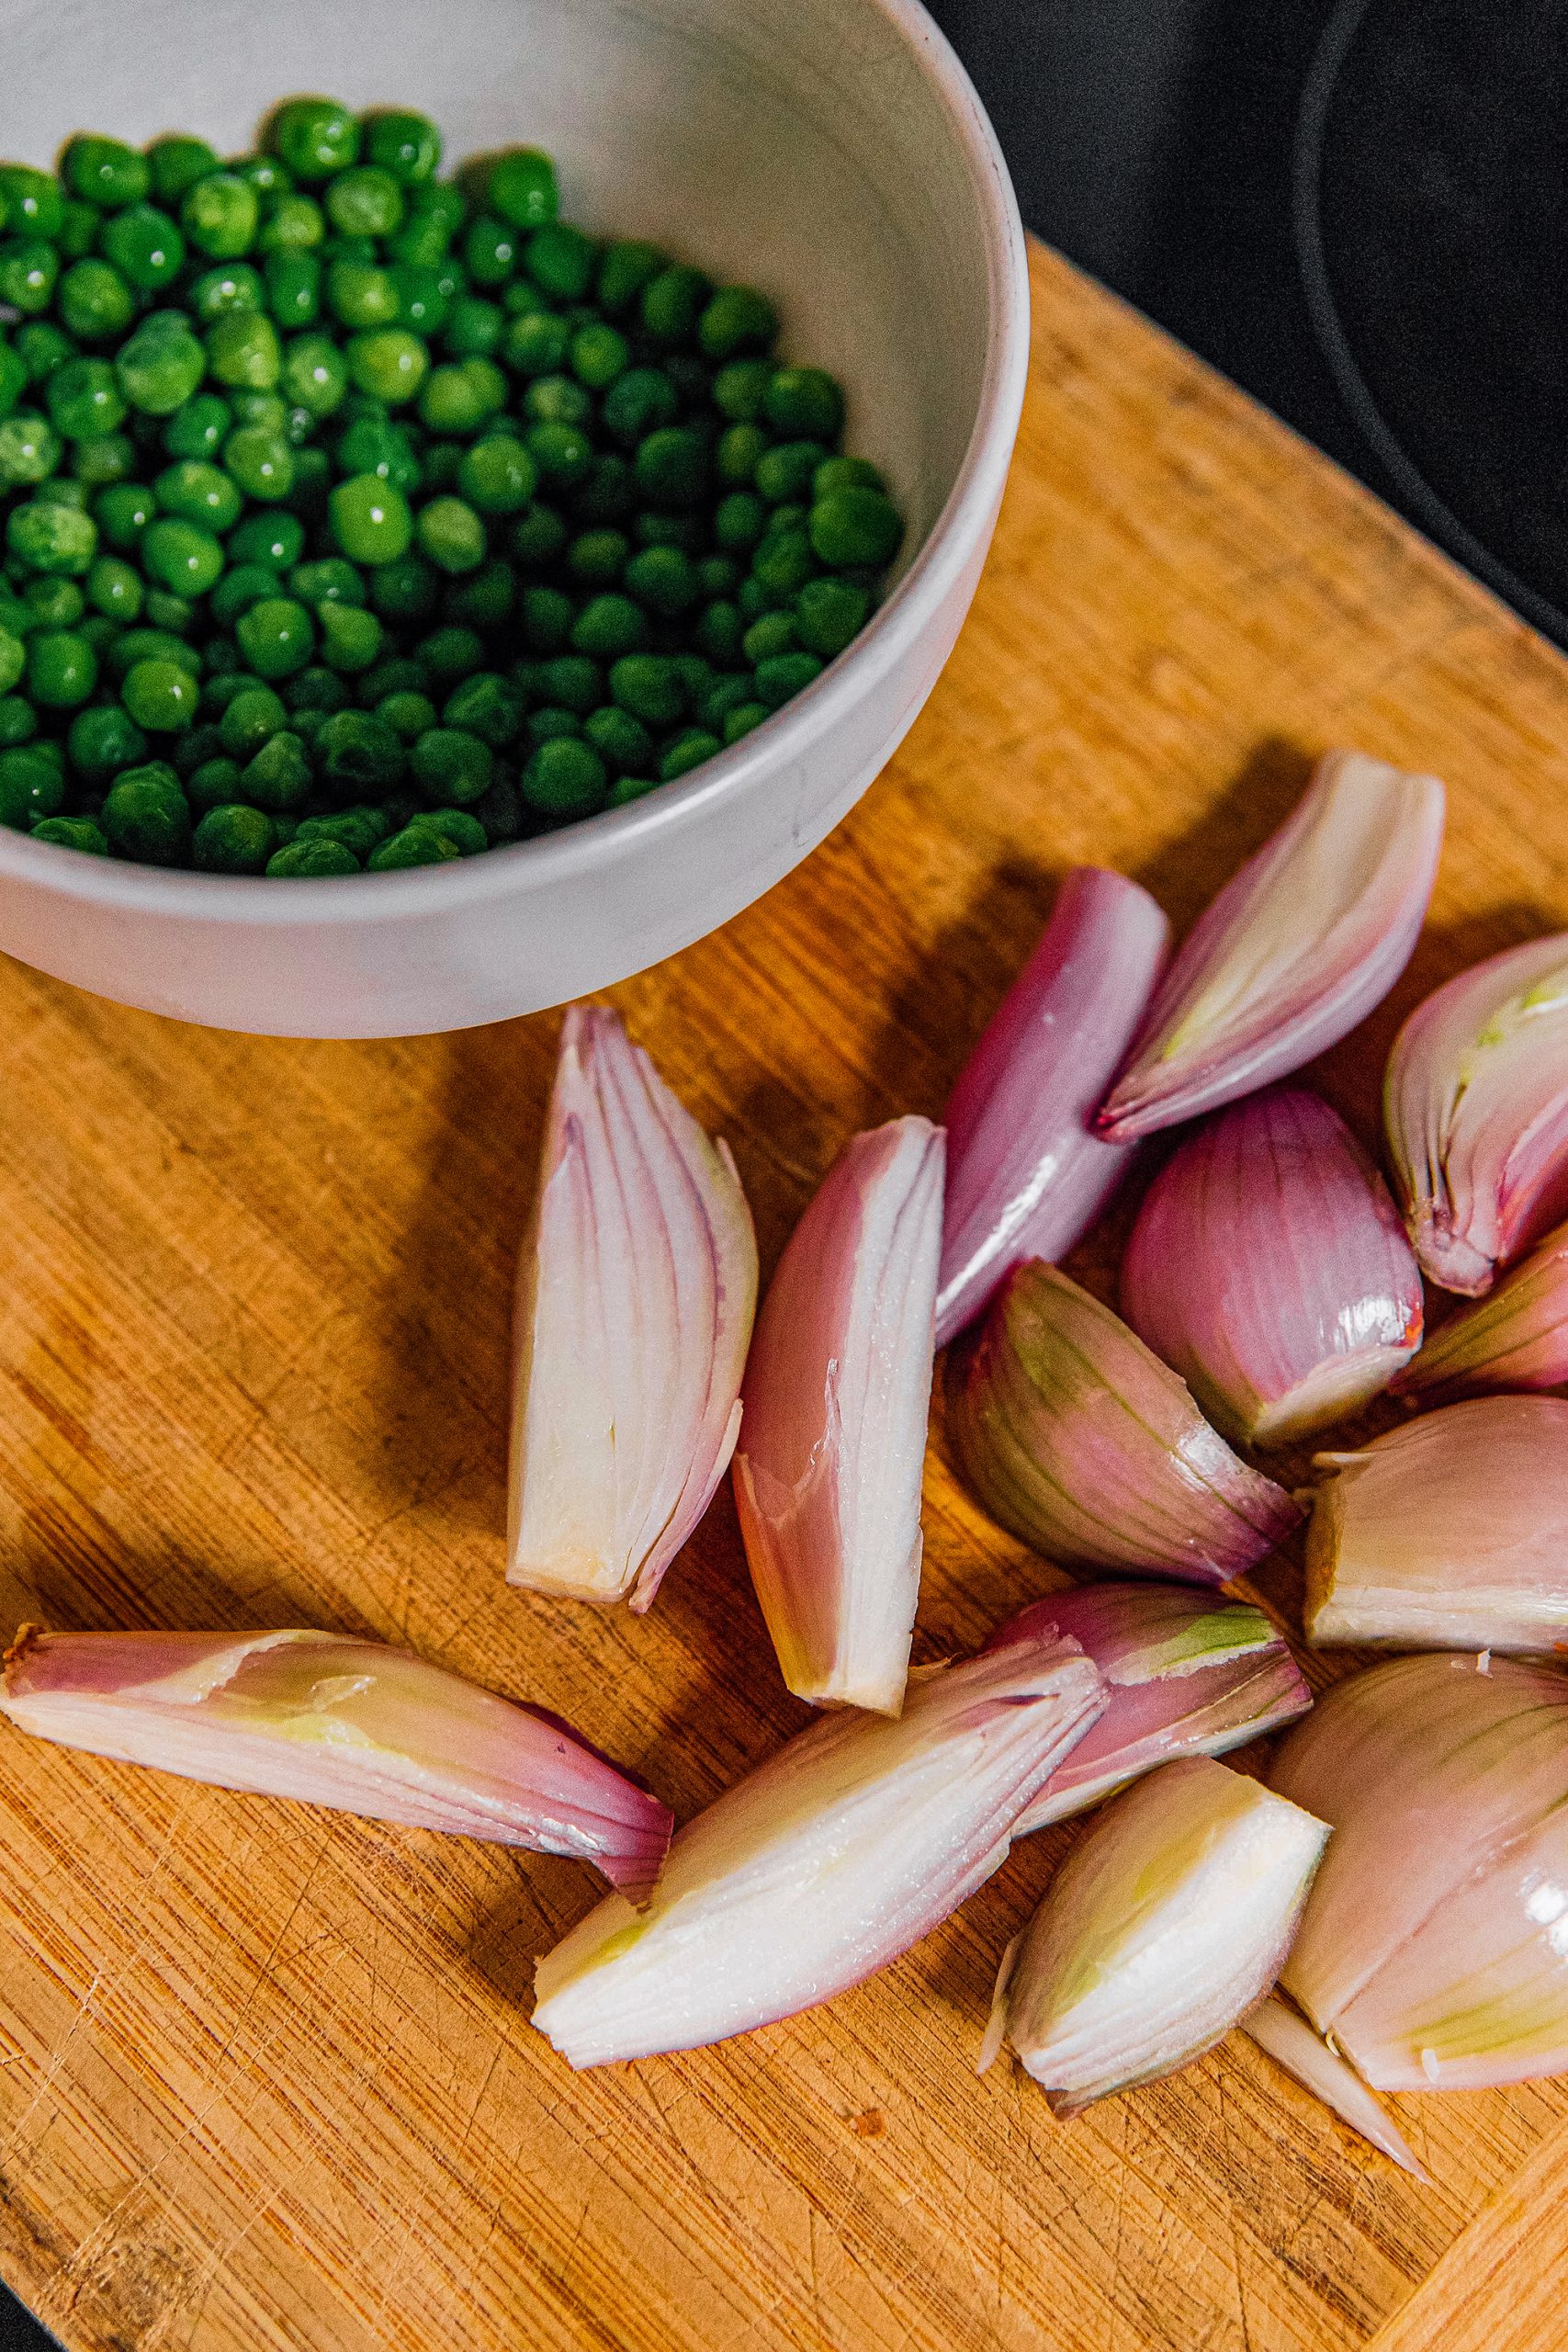 Place onions back into saucepan with peas, then fill with enough water to cover the vegetables.